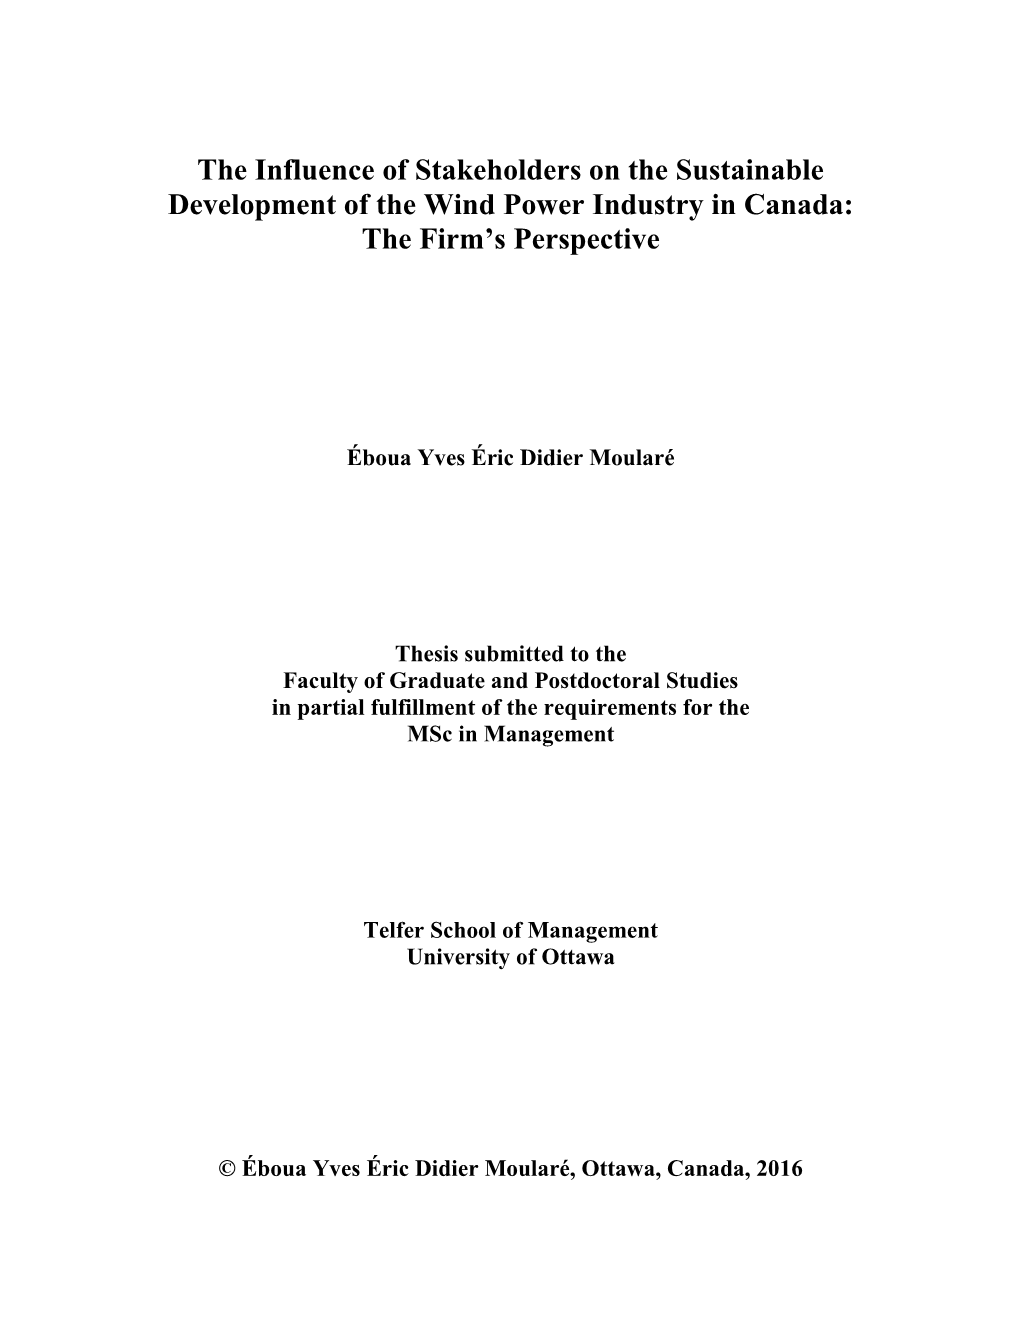 The Influence of Stakeholders on the Sustainable Development of the Wind Power Industry in Canada: the Firm’S Perspective